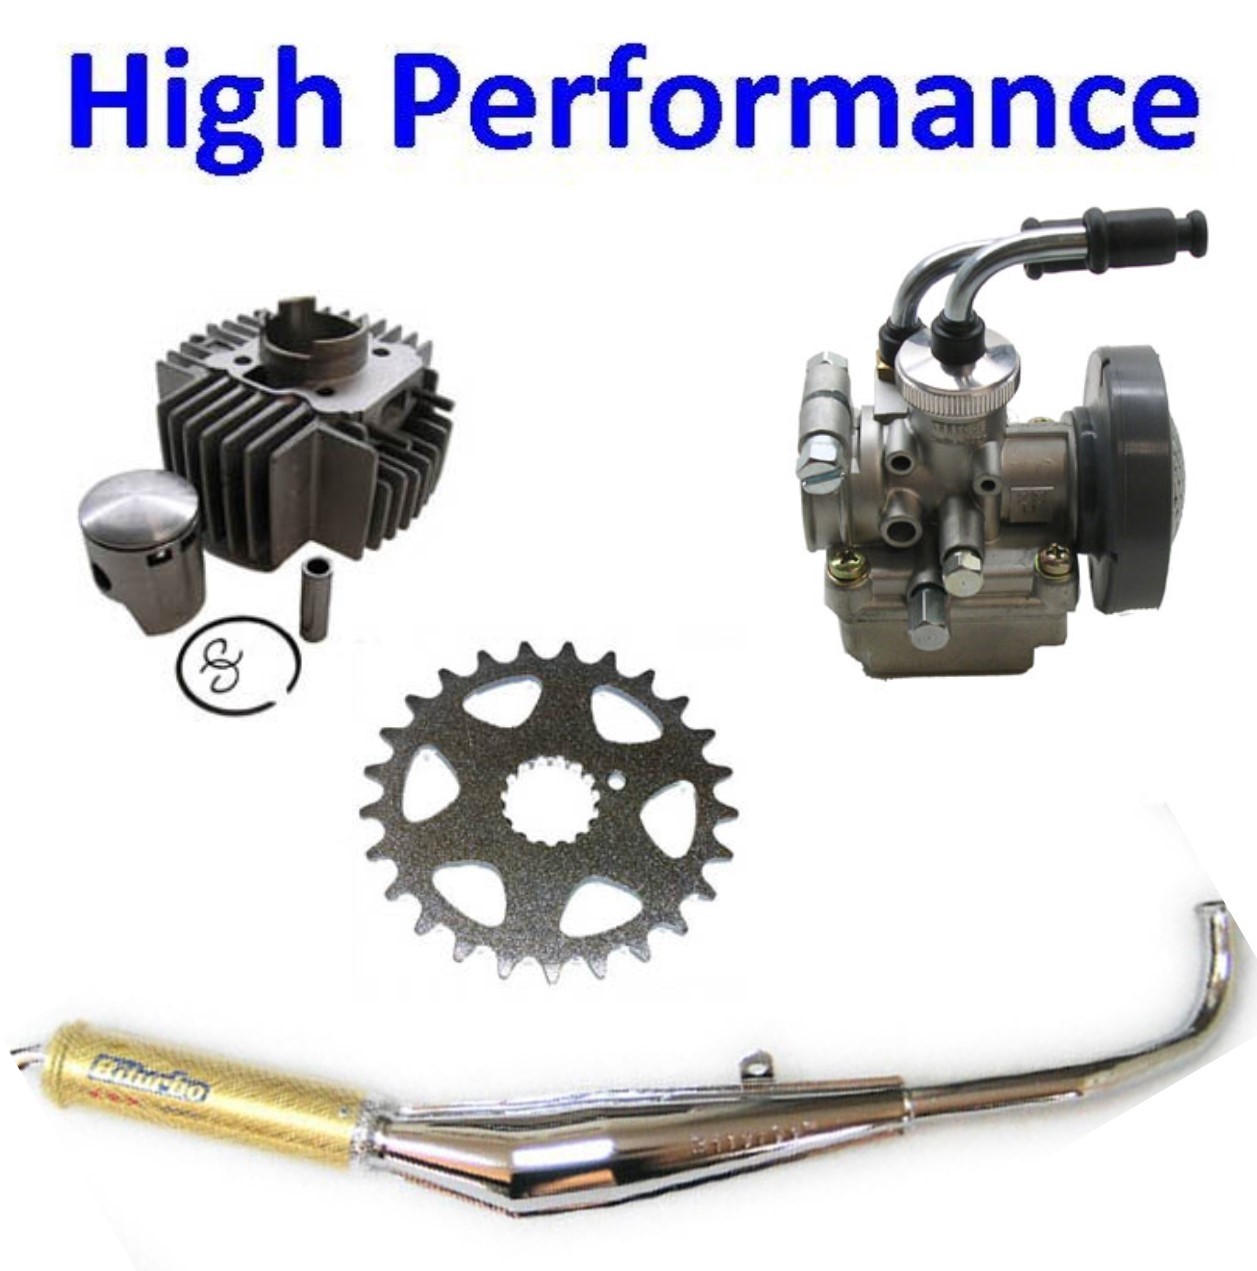 High Performance Parts Tomos A3-A35 Mopeds